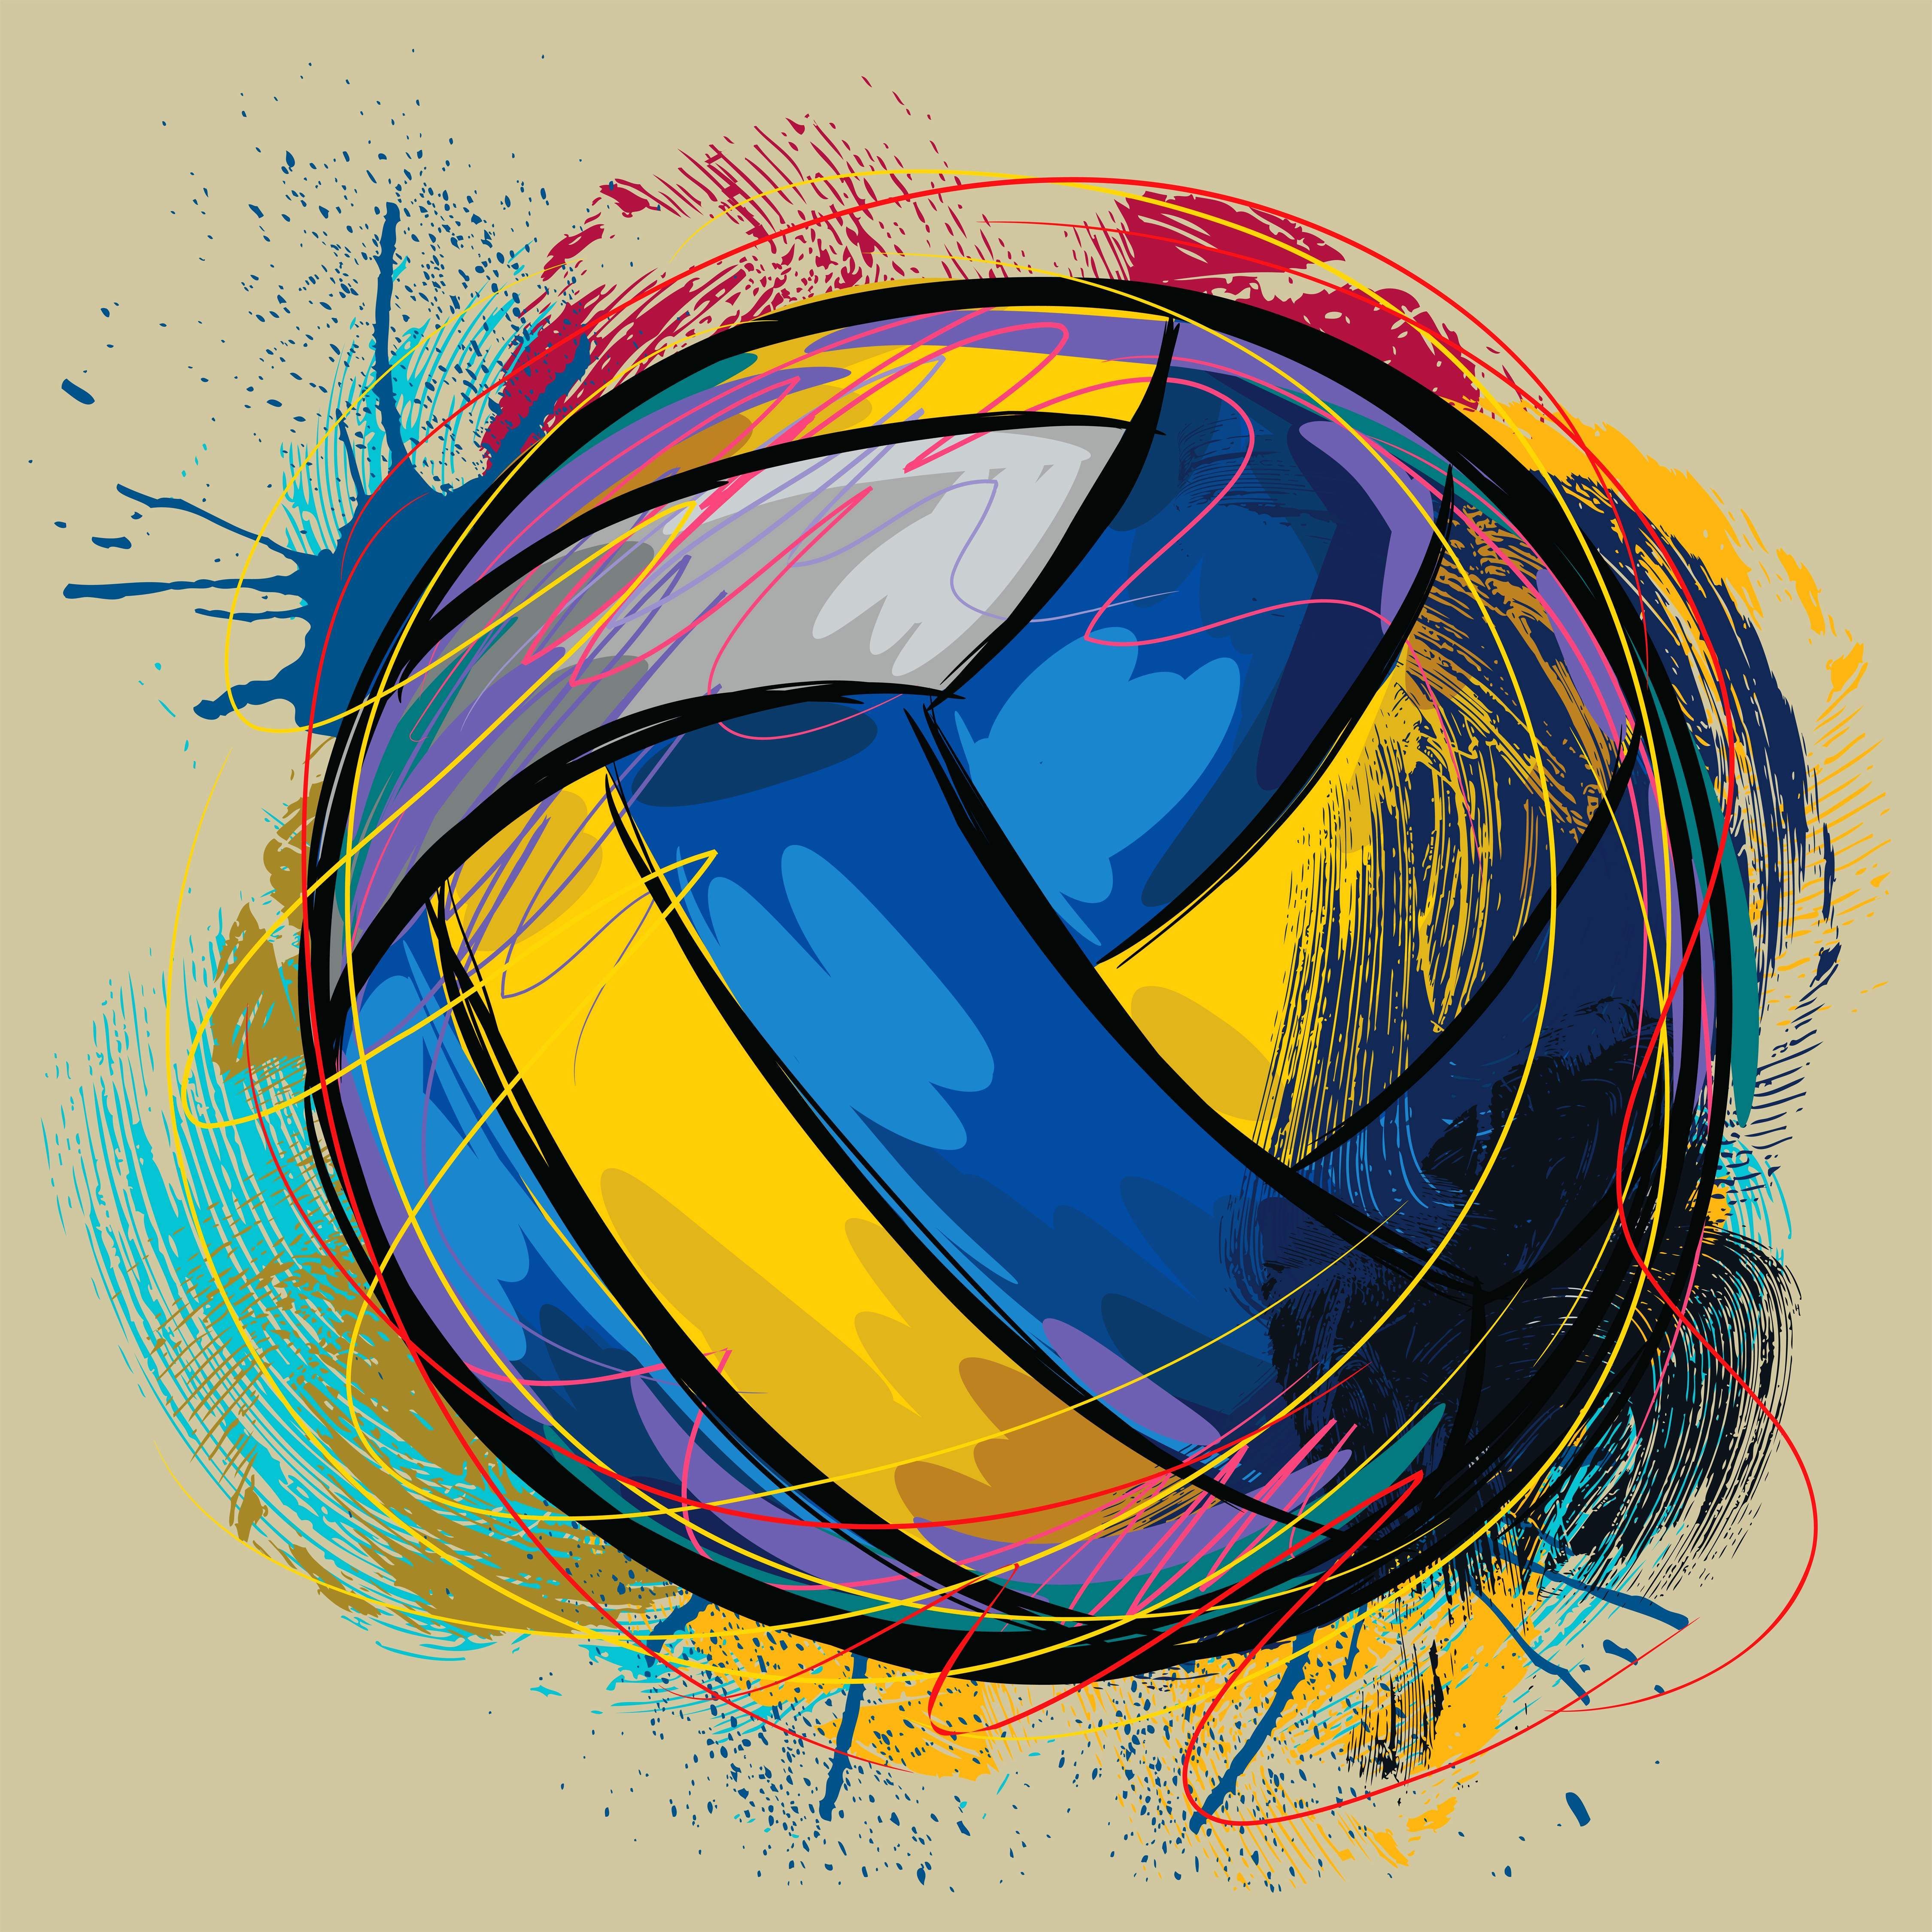 volleyball wallpaper for your phone, graphic design, illustration, font, graphics, circle